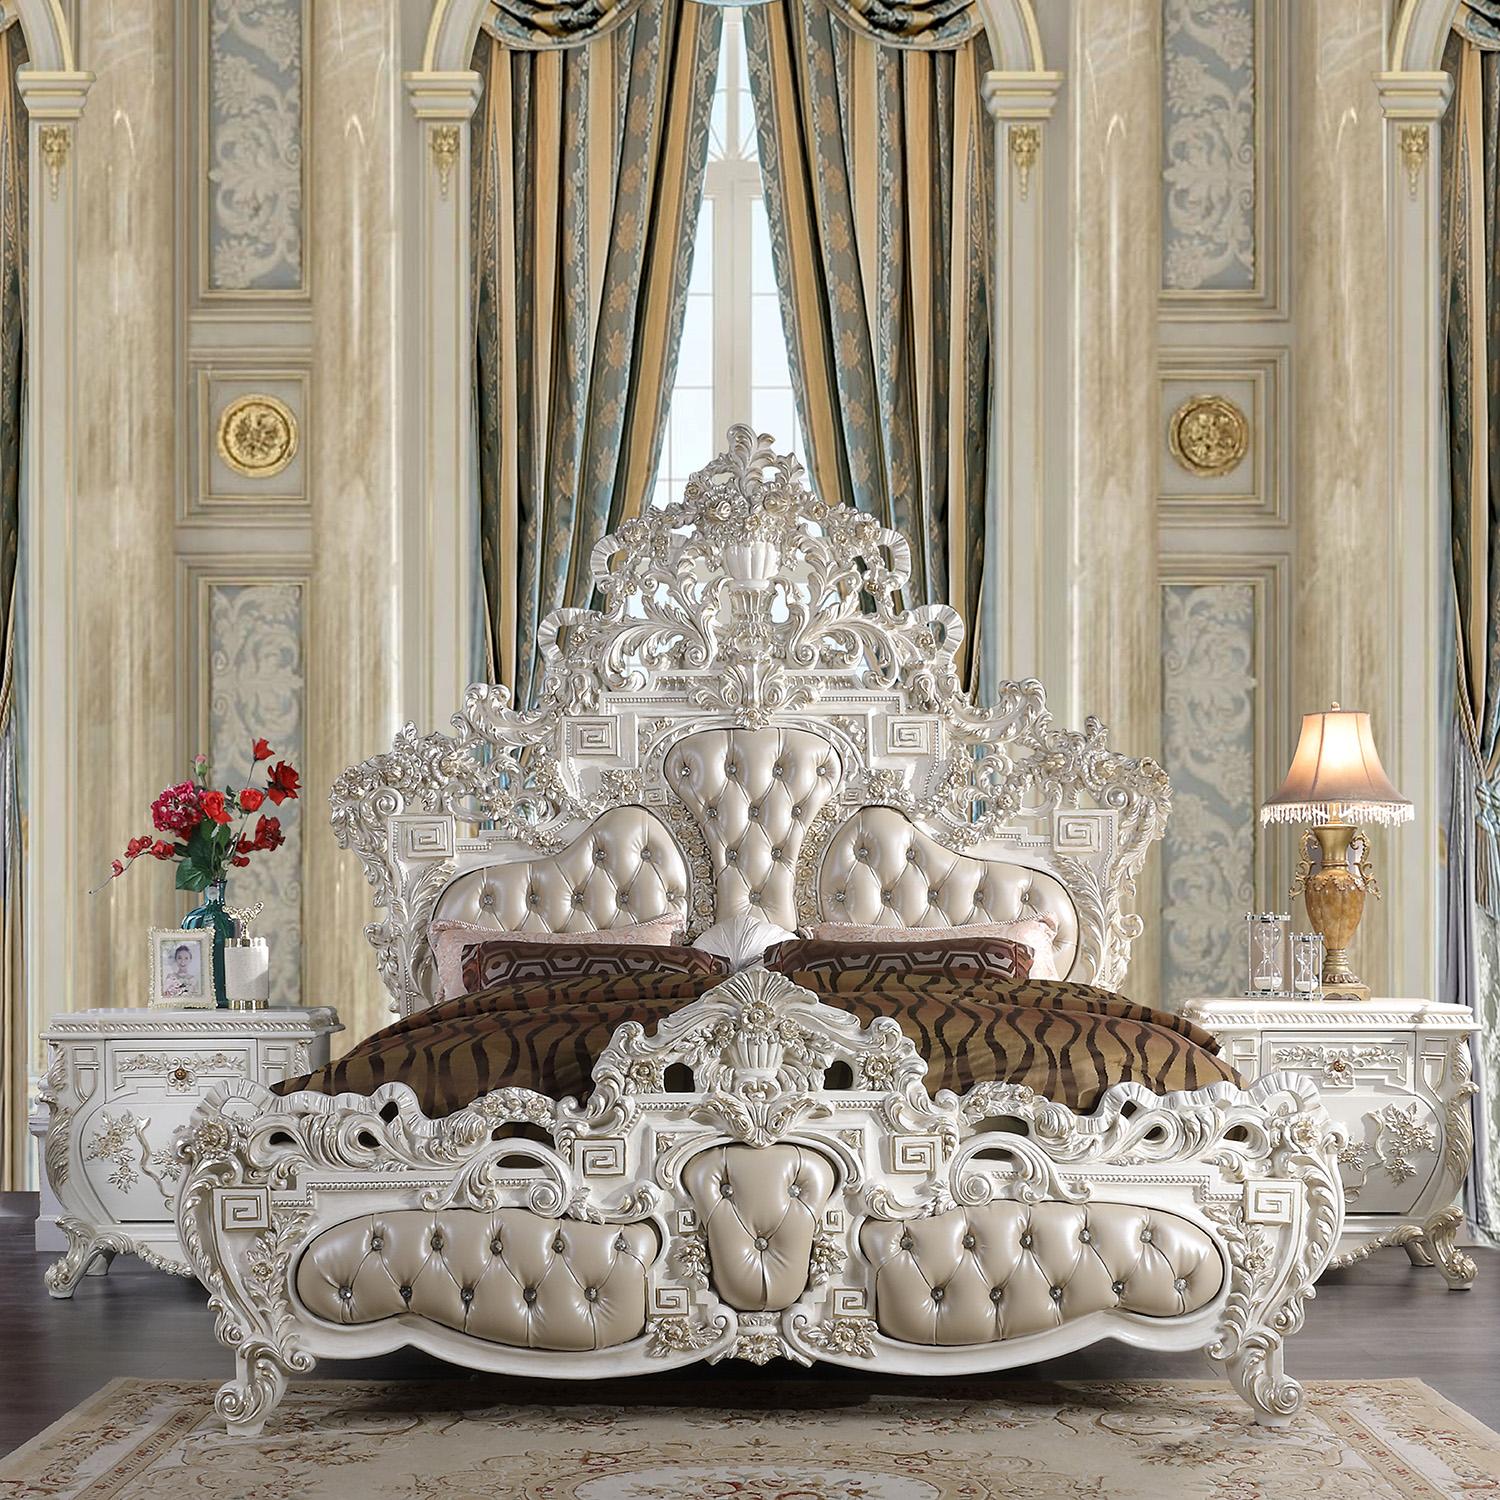 

    
Pearl Cream & White Tufted CAL King Bed Traditional Homey Design HD-1807
